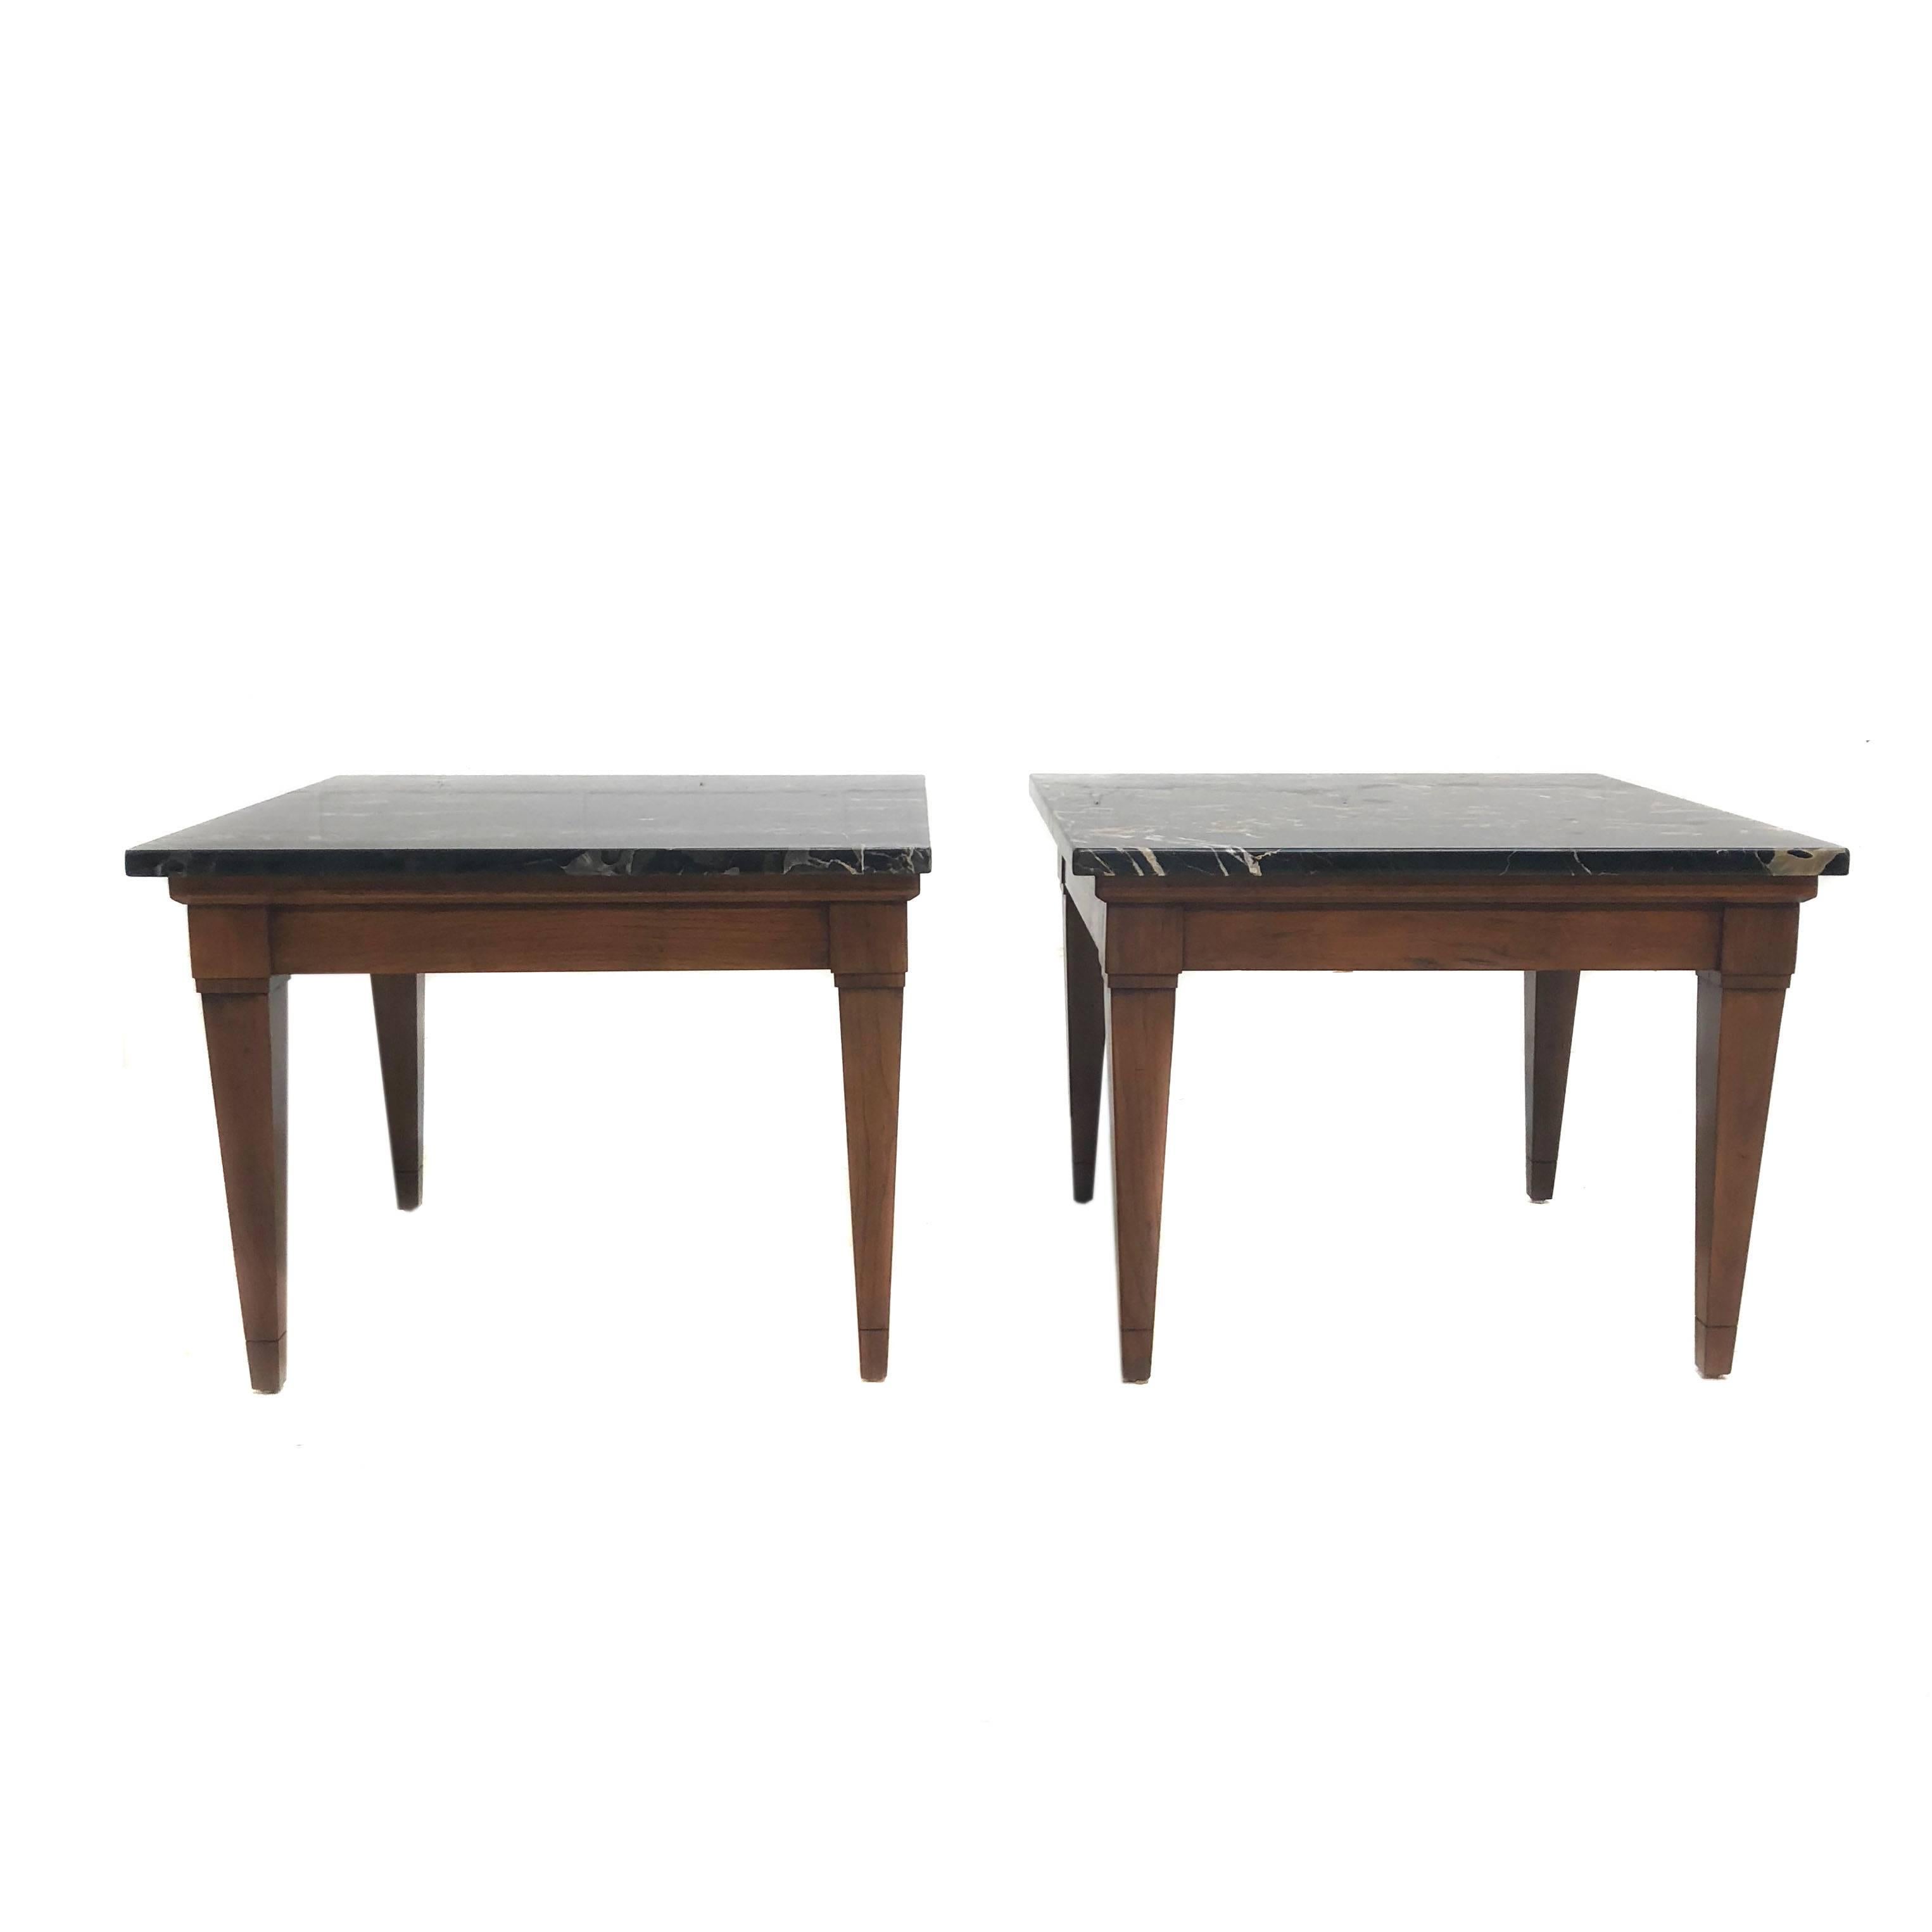 20th Century Midcentury Marble-Top Side Tables Made in Italy For Sale